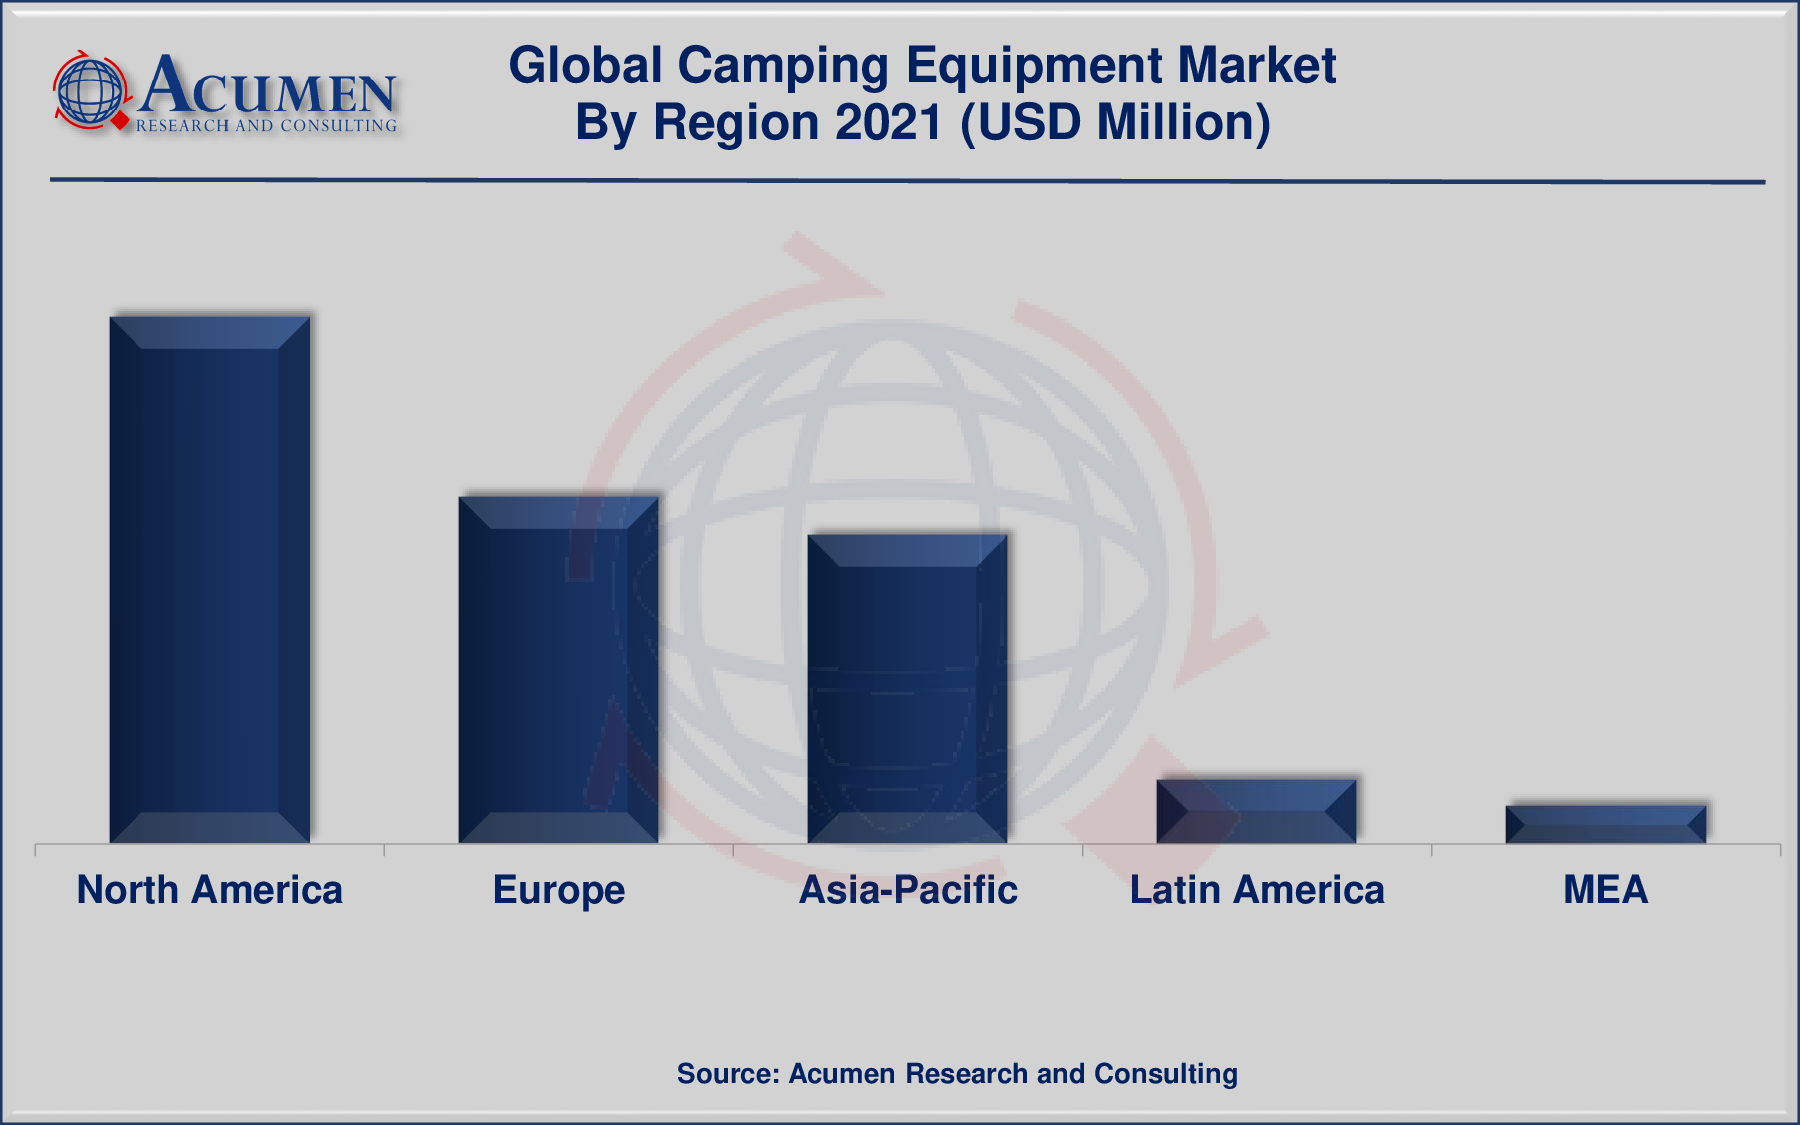 Camping Equipment Market Growth was valued at USD 15,267 Million in 2021 and is predicted to be worth USD 27,318 Million by 2030, with a CAGR of 6.9% from 2022 to 2030.